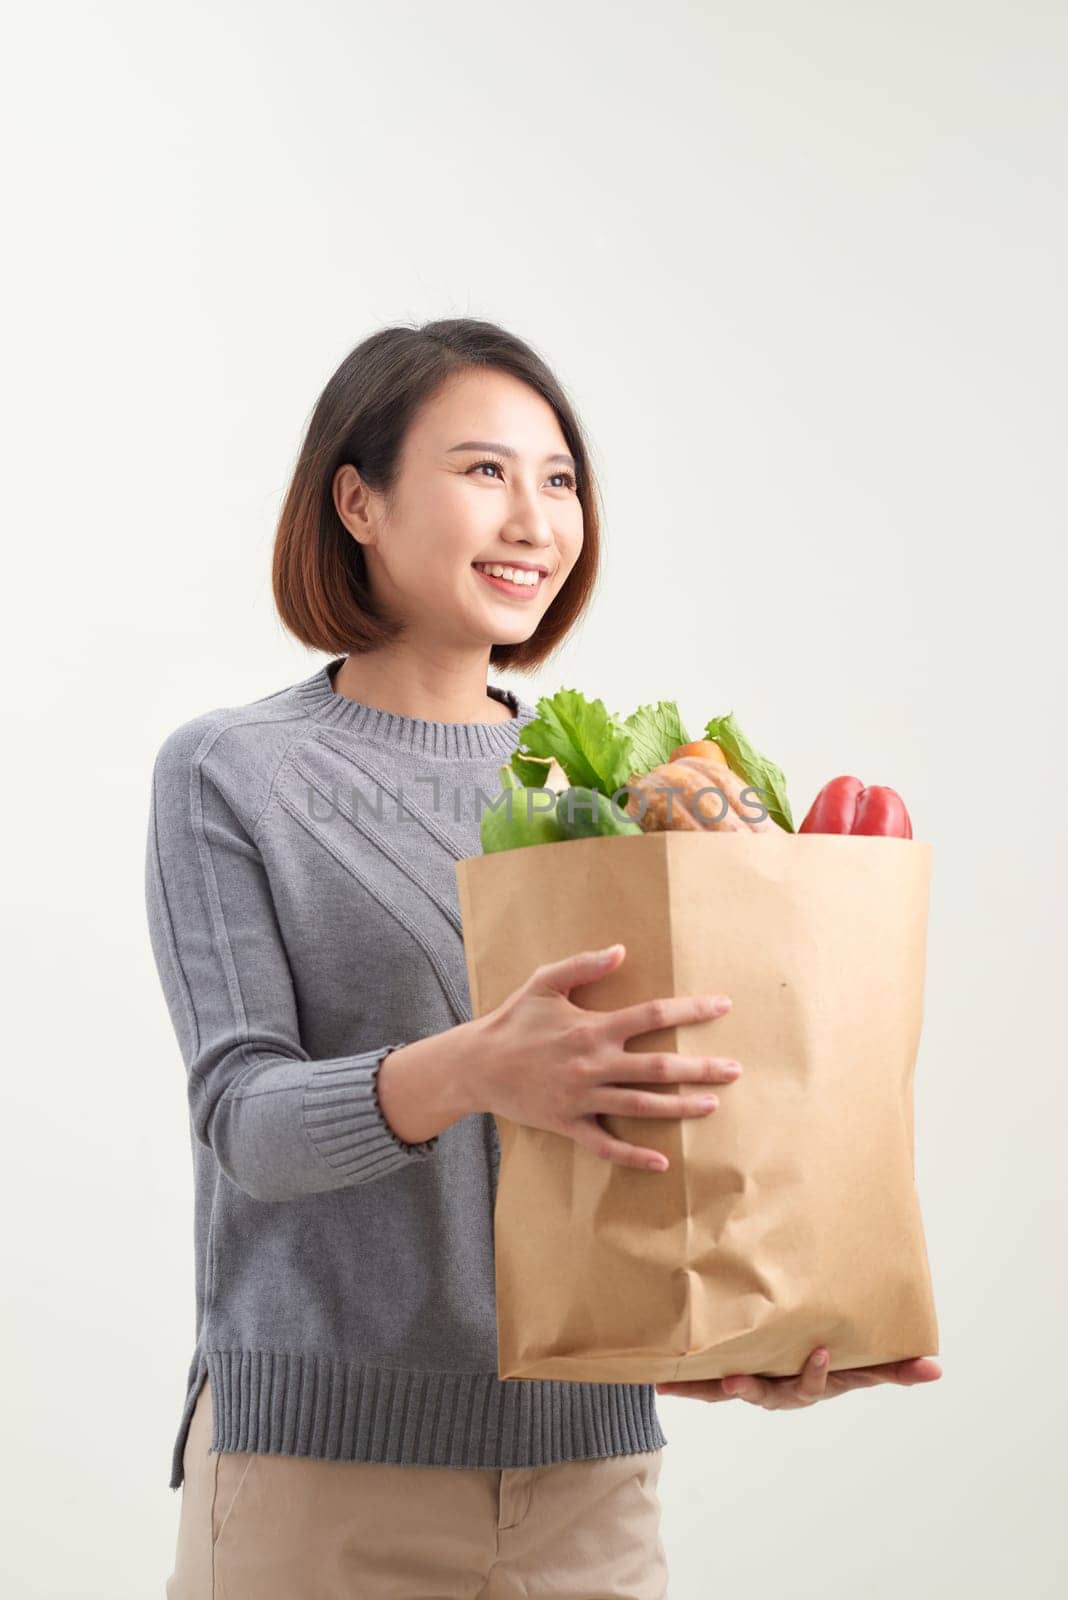 Portrait Of Happy Young Woman Holding Grocery Bag Over White Background